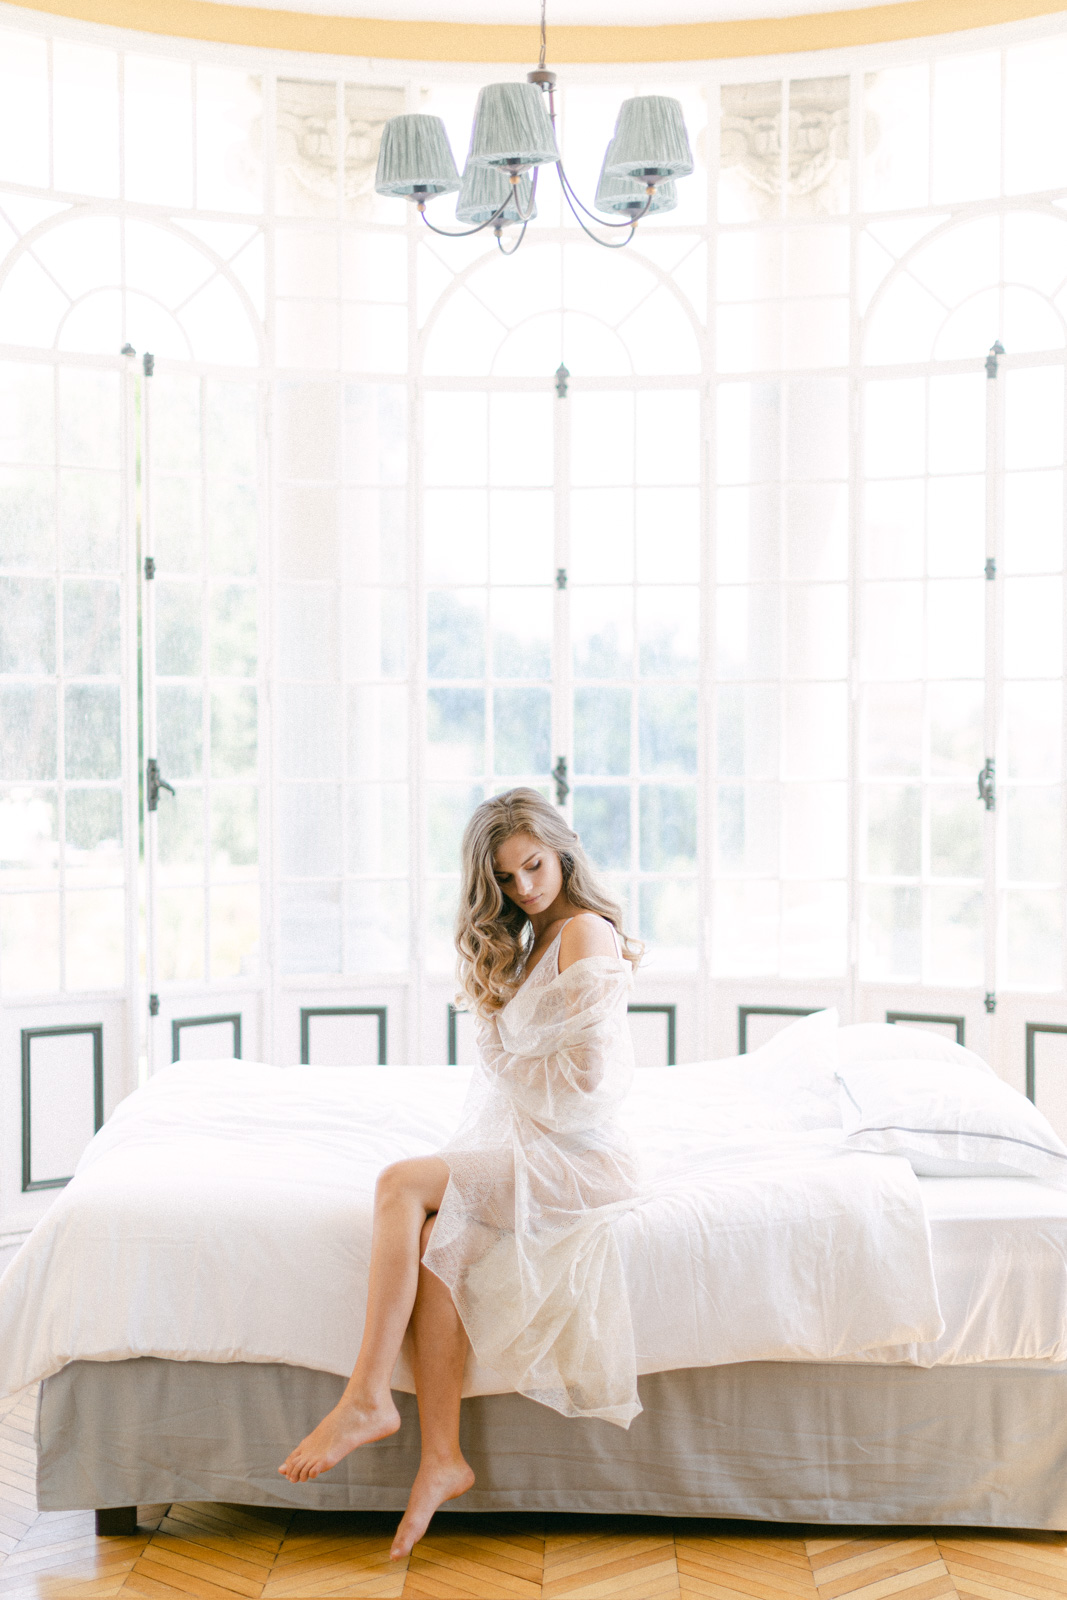 An intimate boudoir shot of the bride, taken before the Chateau Mader wedding